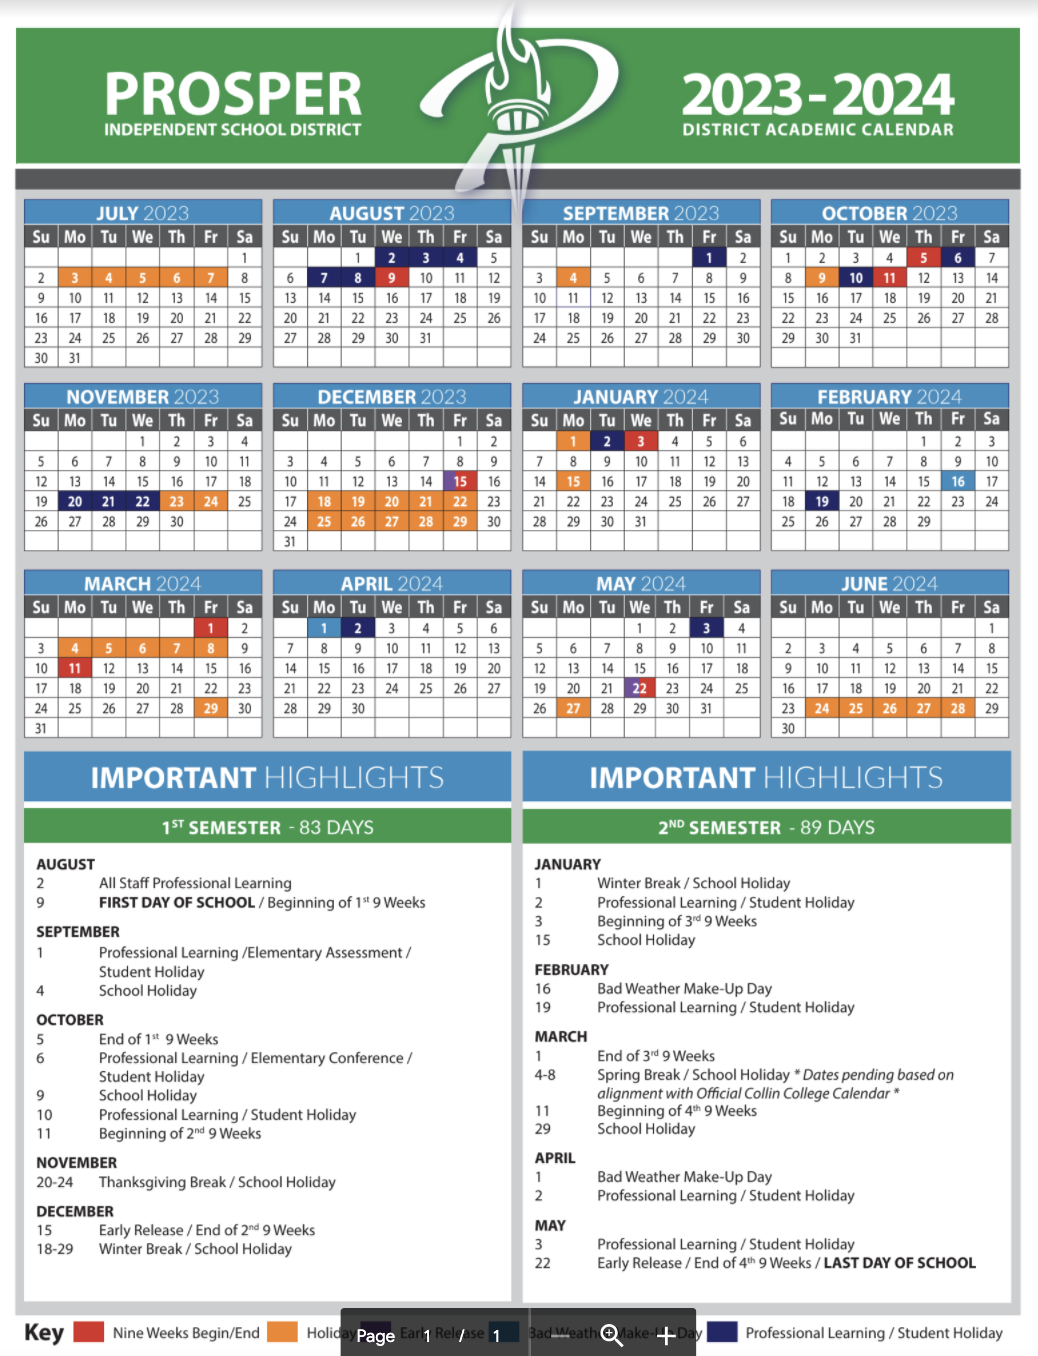 Mckinney Isd Calendar 2022 23 Here Are Prosper Isd's School Calendars For The 2022-2023 And The 2023-2024  School Years | Cities | Checkoutdfw.com